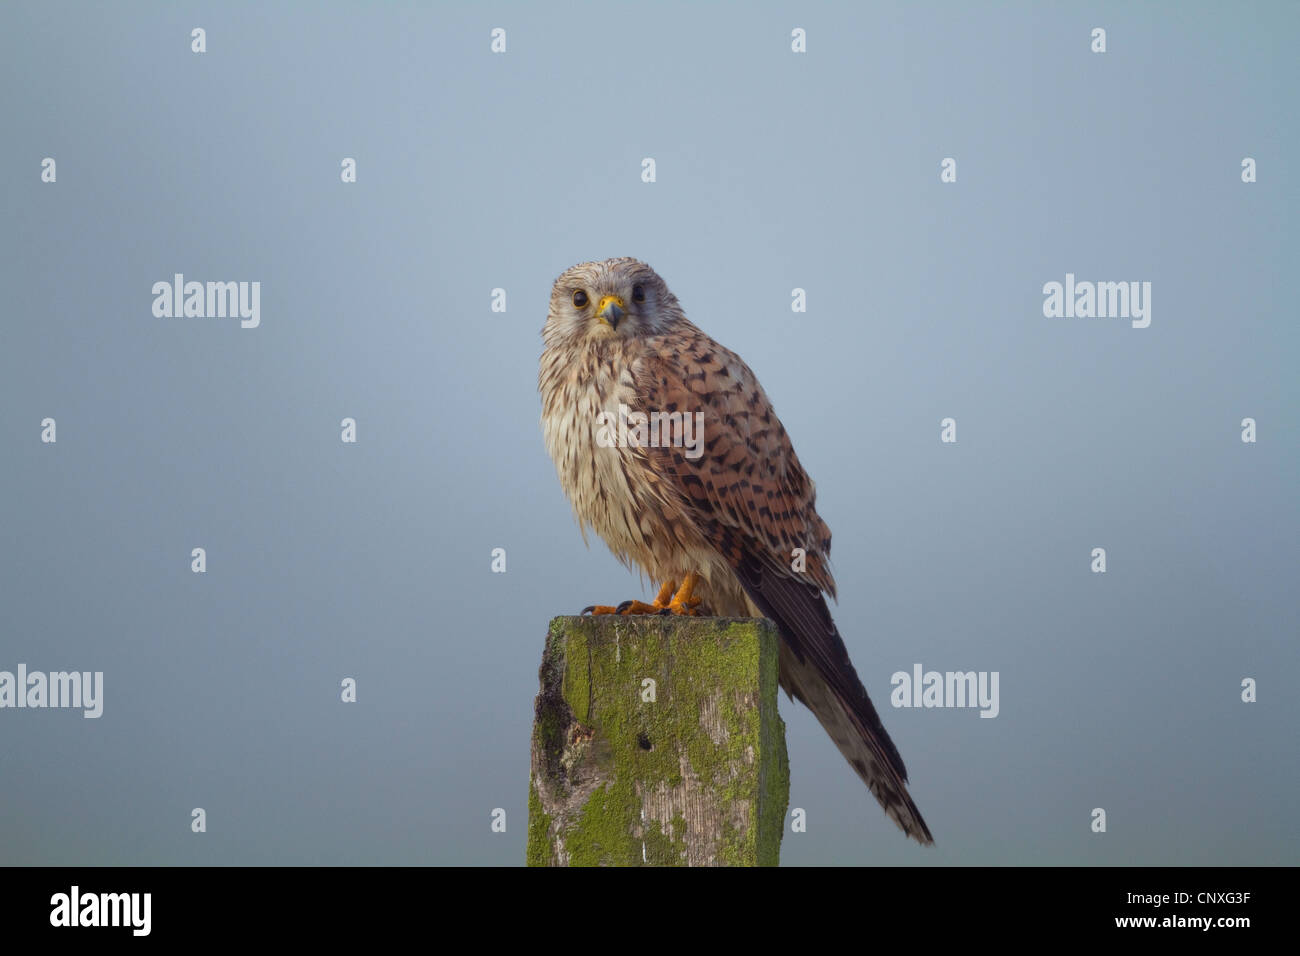 common kestrel (Falco tinnunculus), sitting on a wooden post in morning mist, Germany Stock Photo